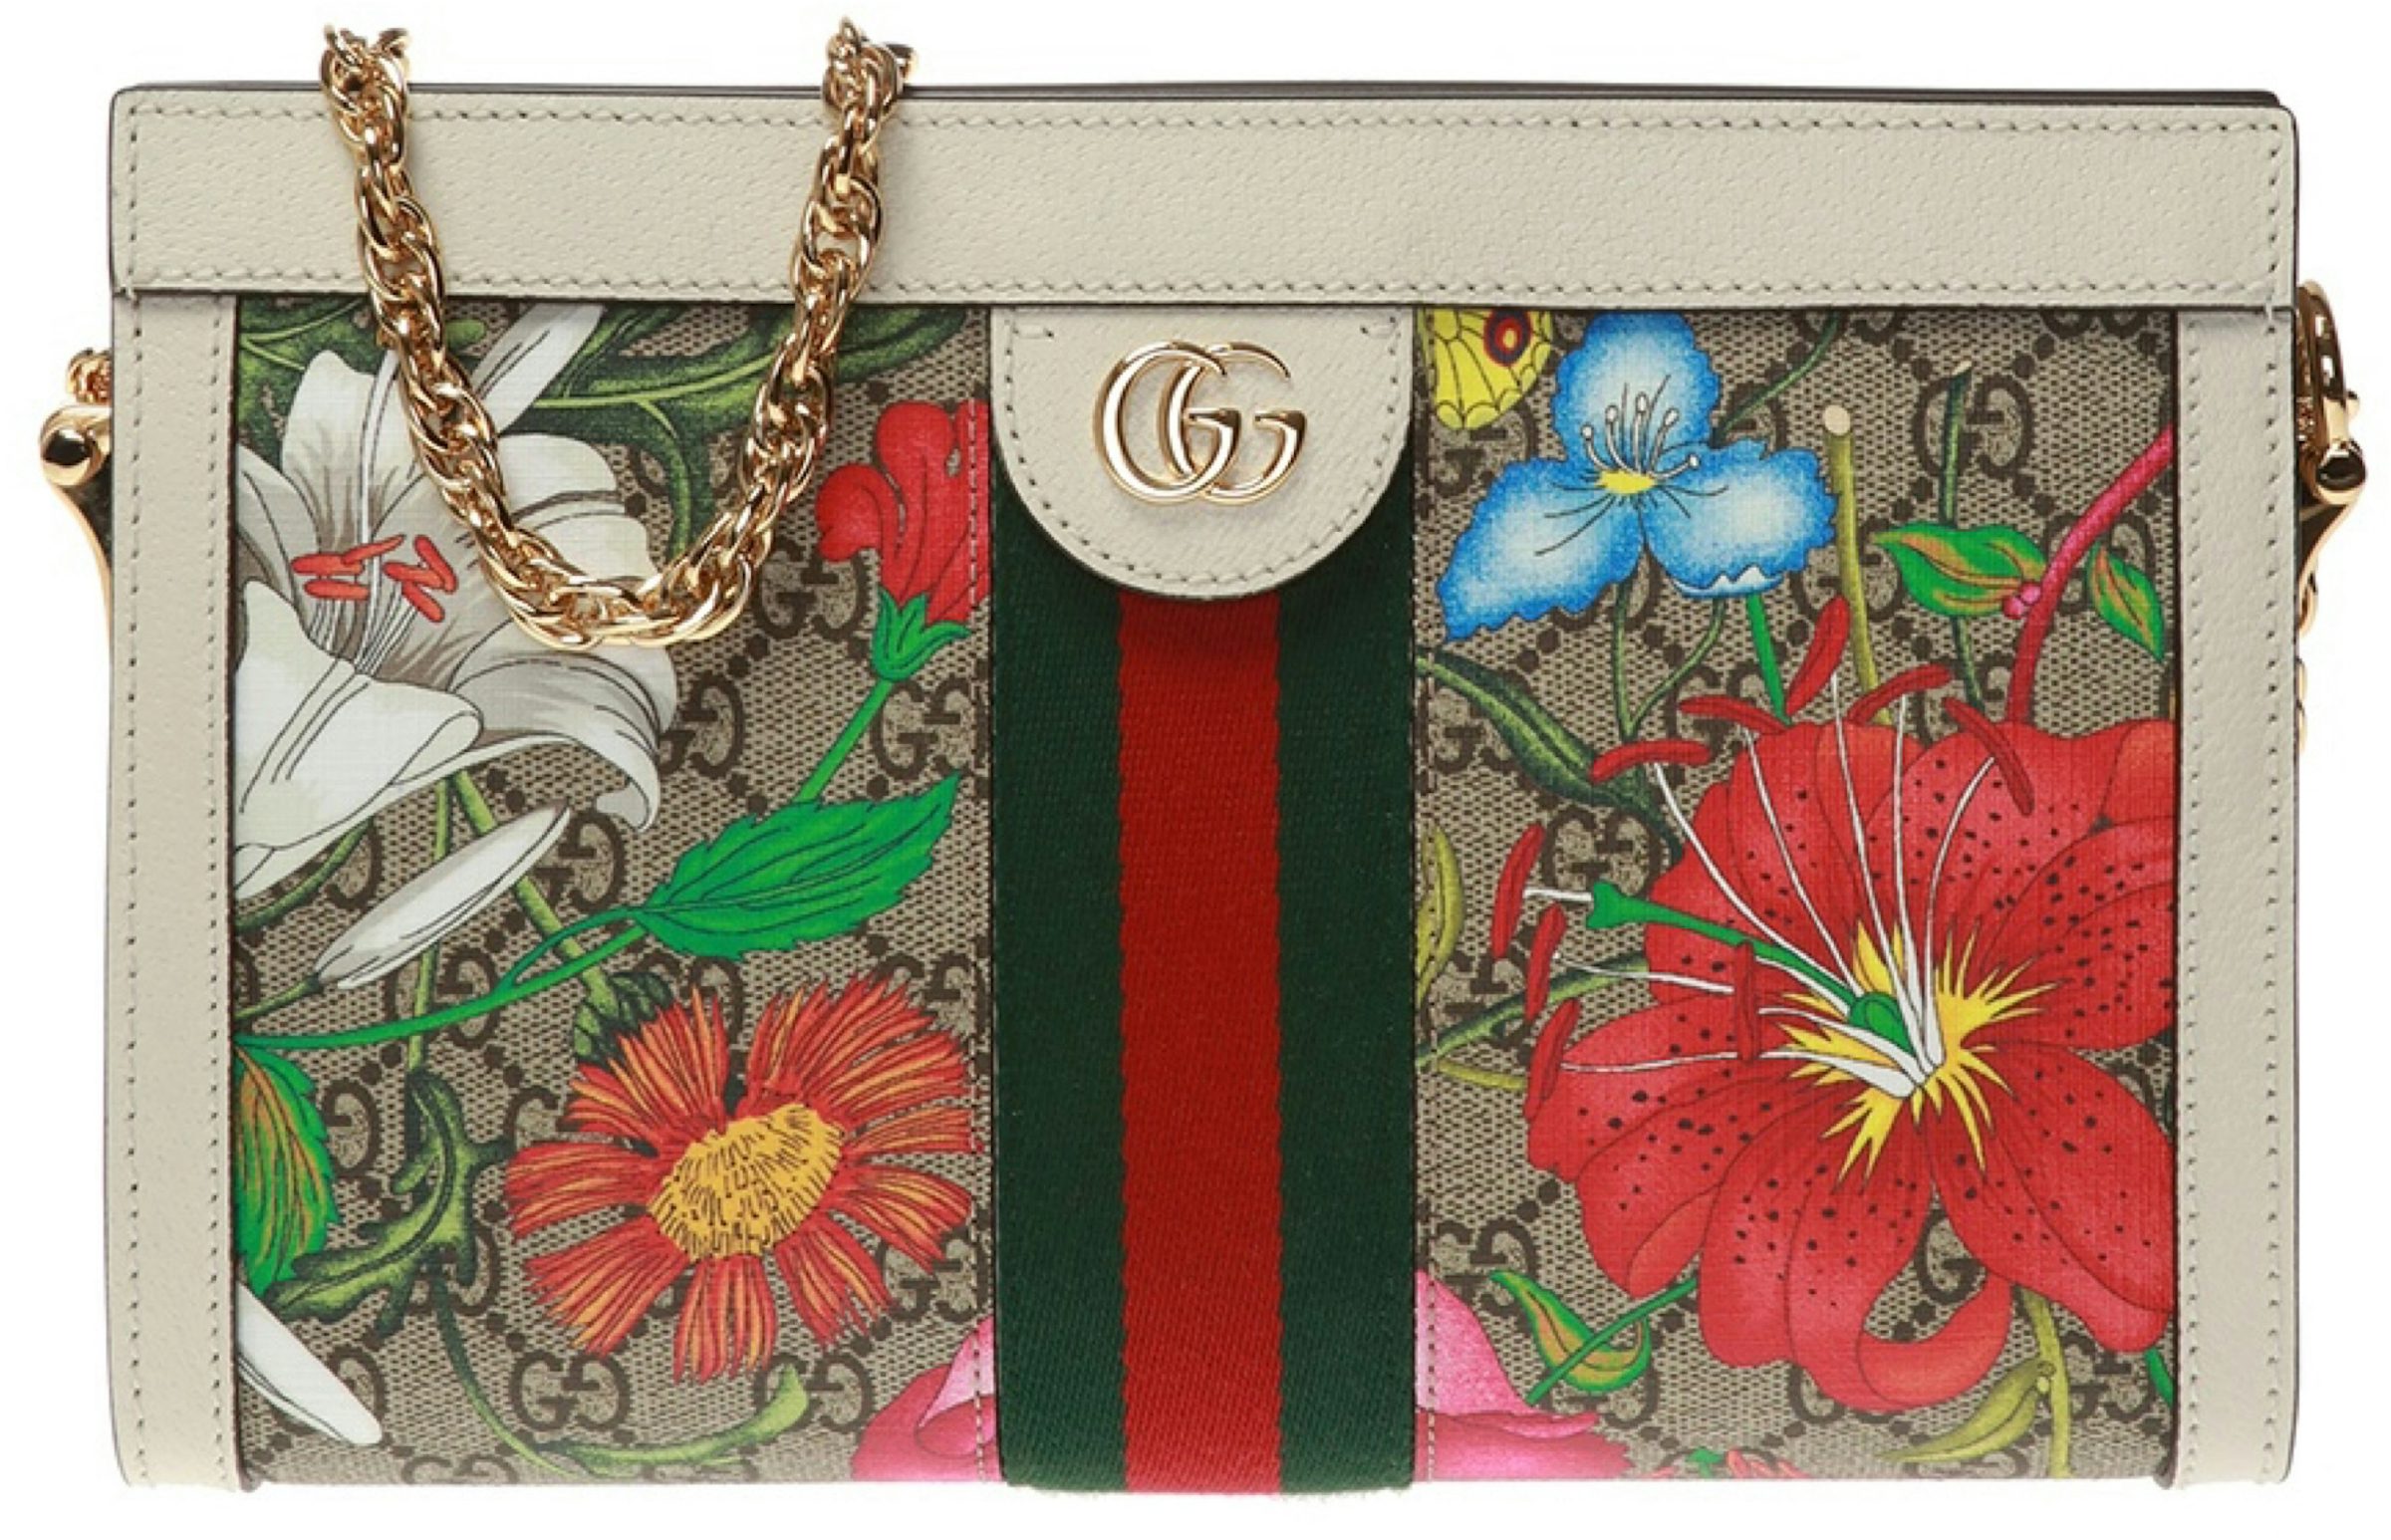 Gucci Ophidia Floral Pattern Tote Bag in Green